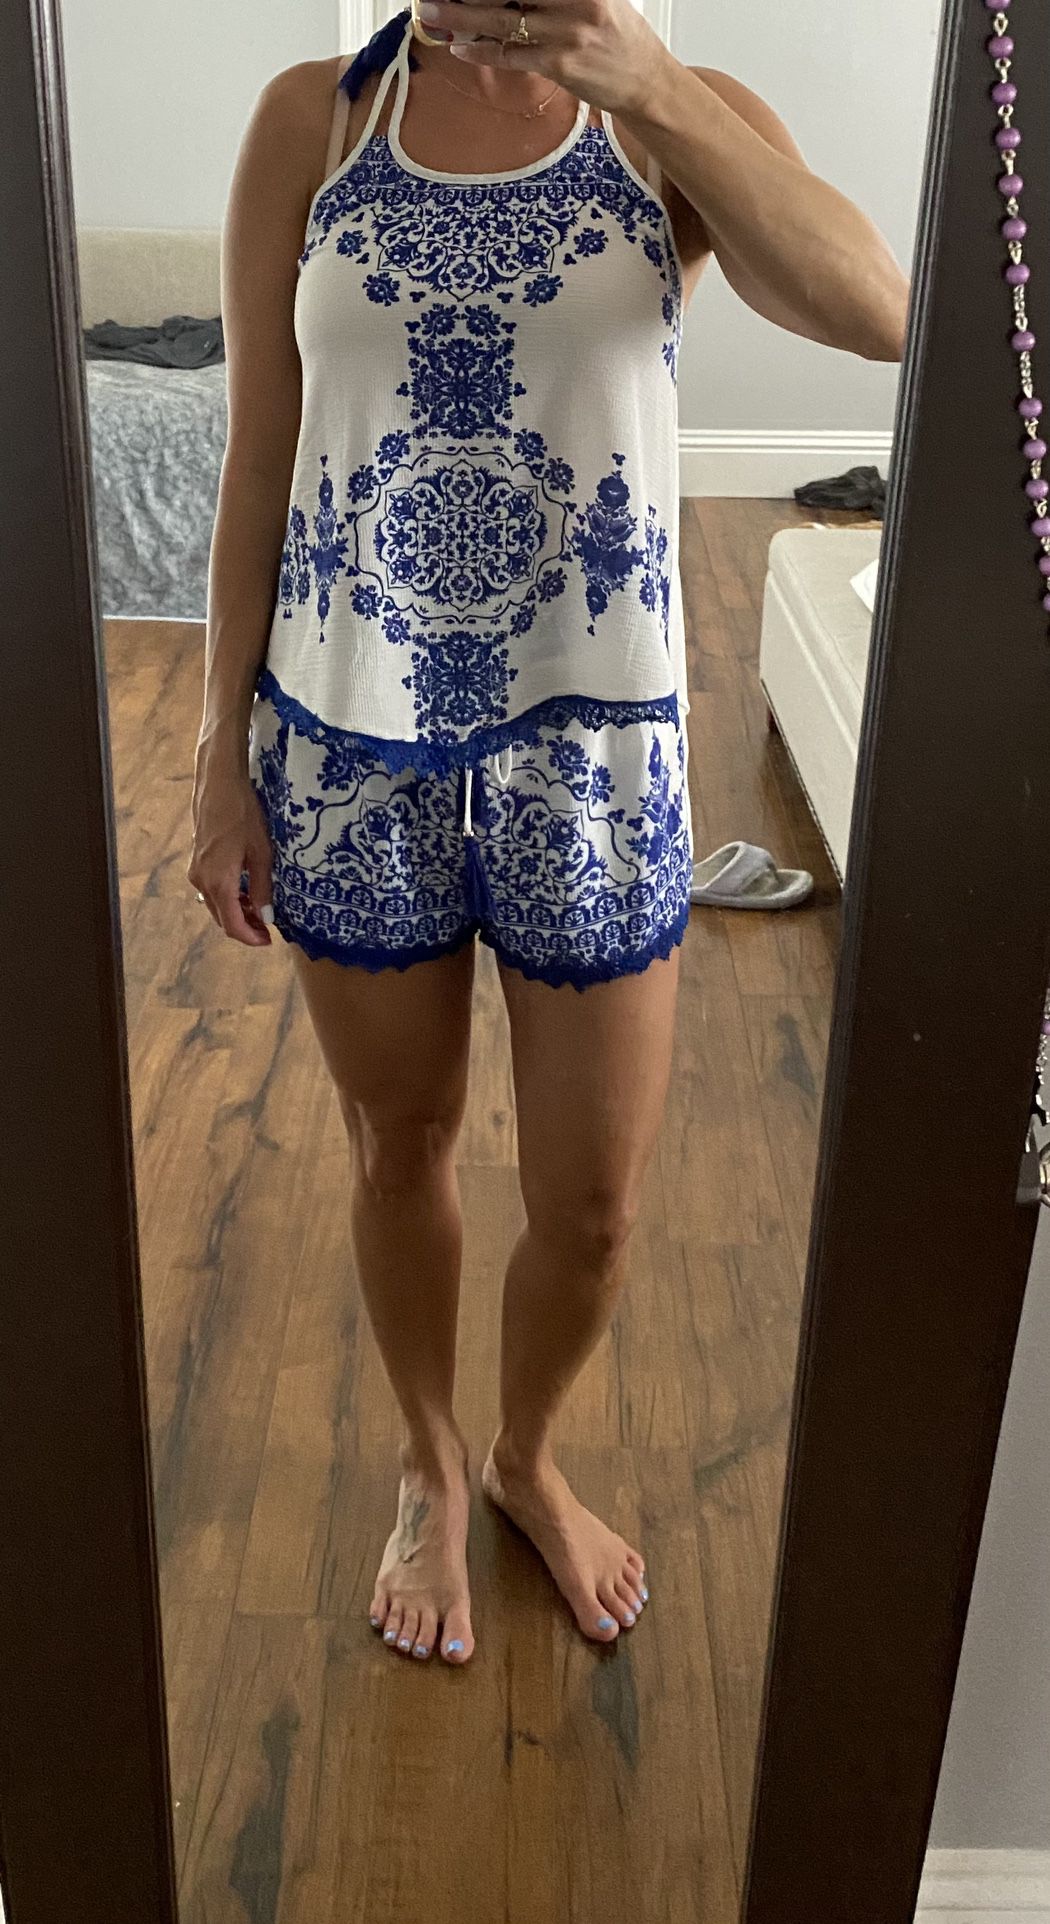 Blue and white two-piece halter top and shorts set